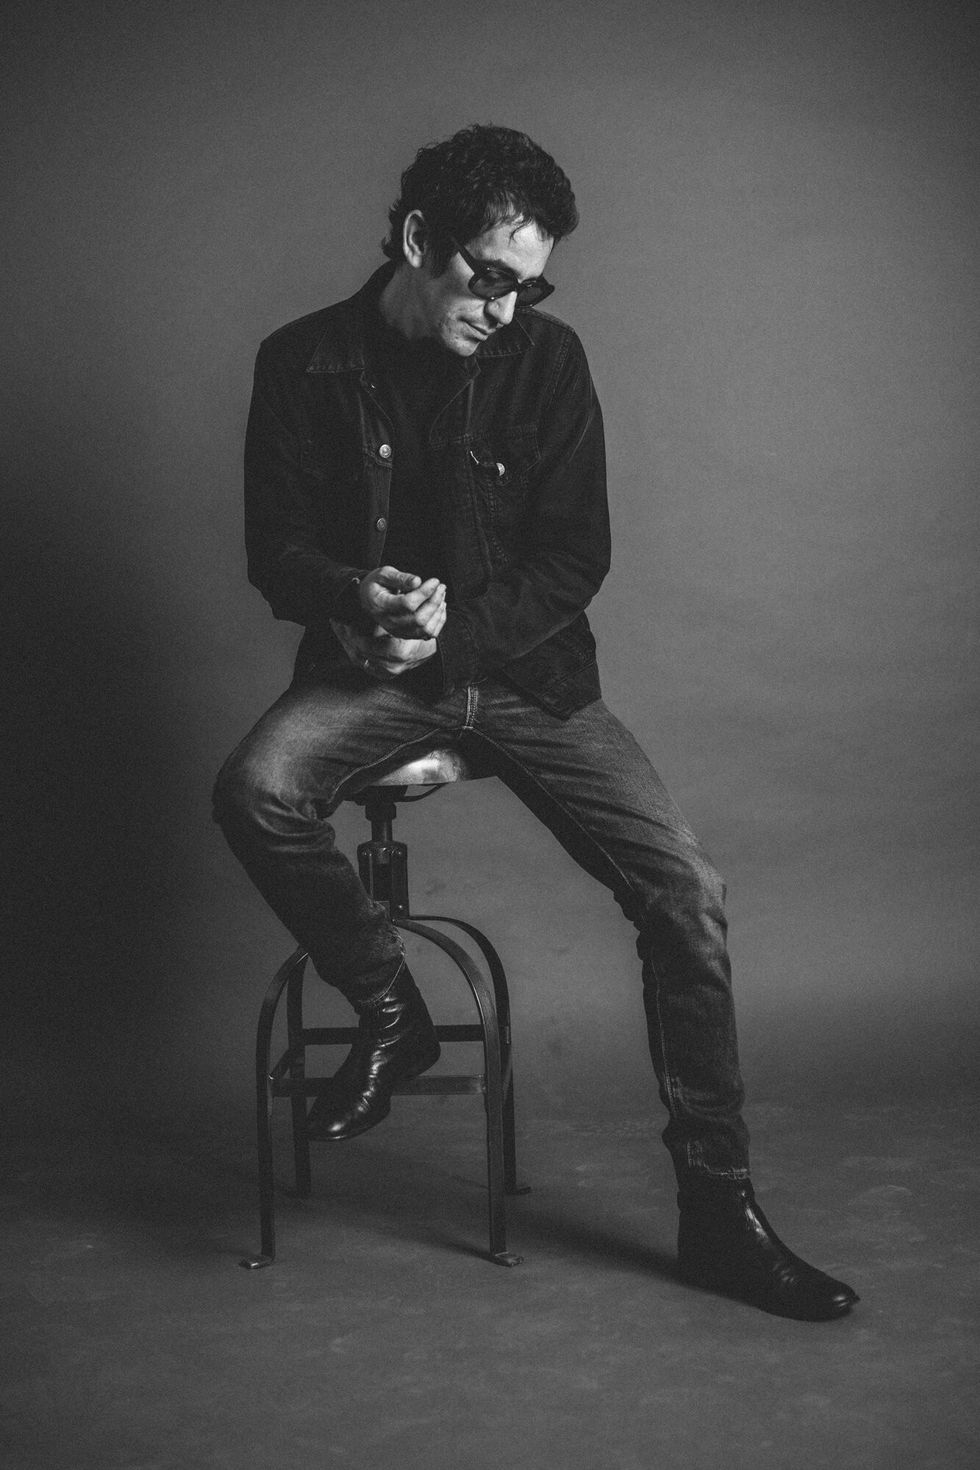 Finding Time in a Bottle with  the Music of A.J. Croce